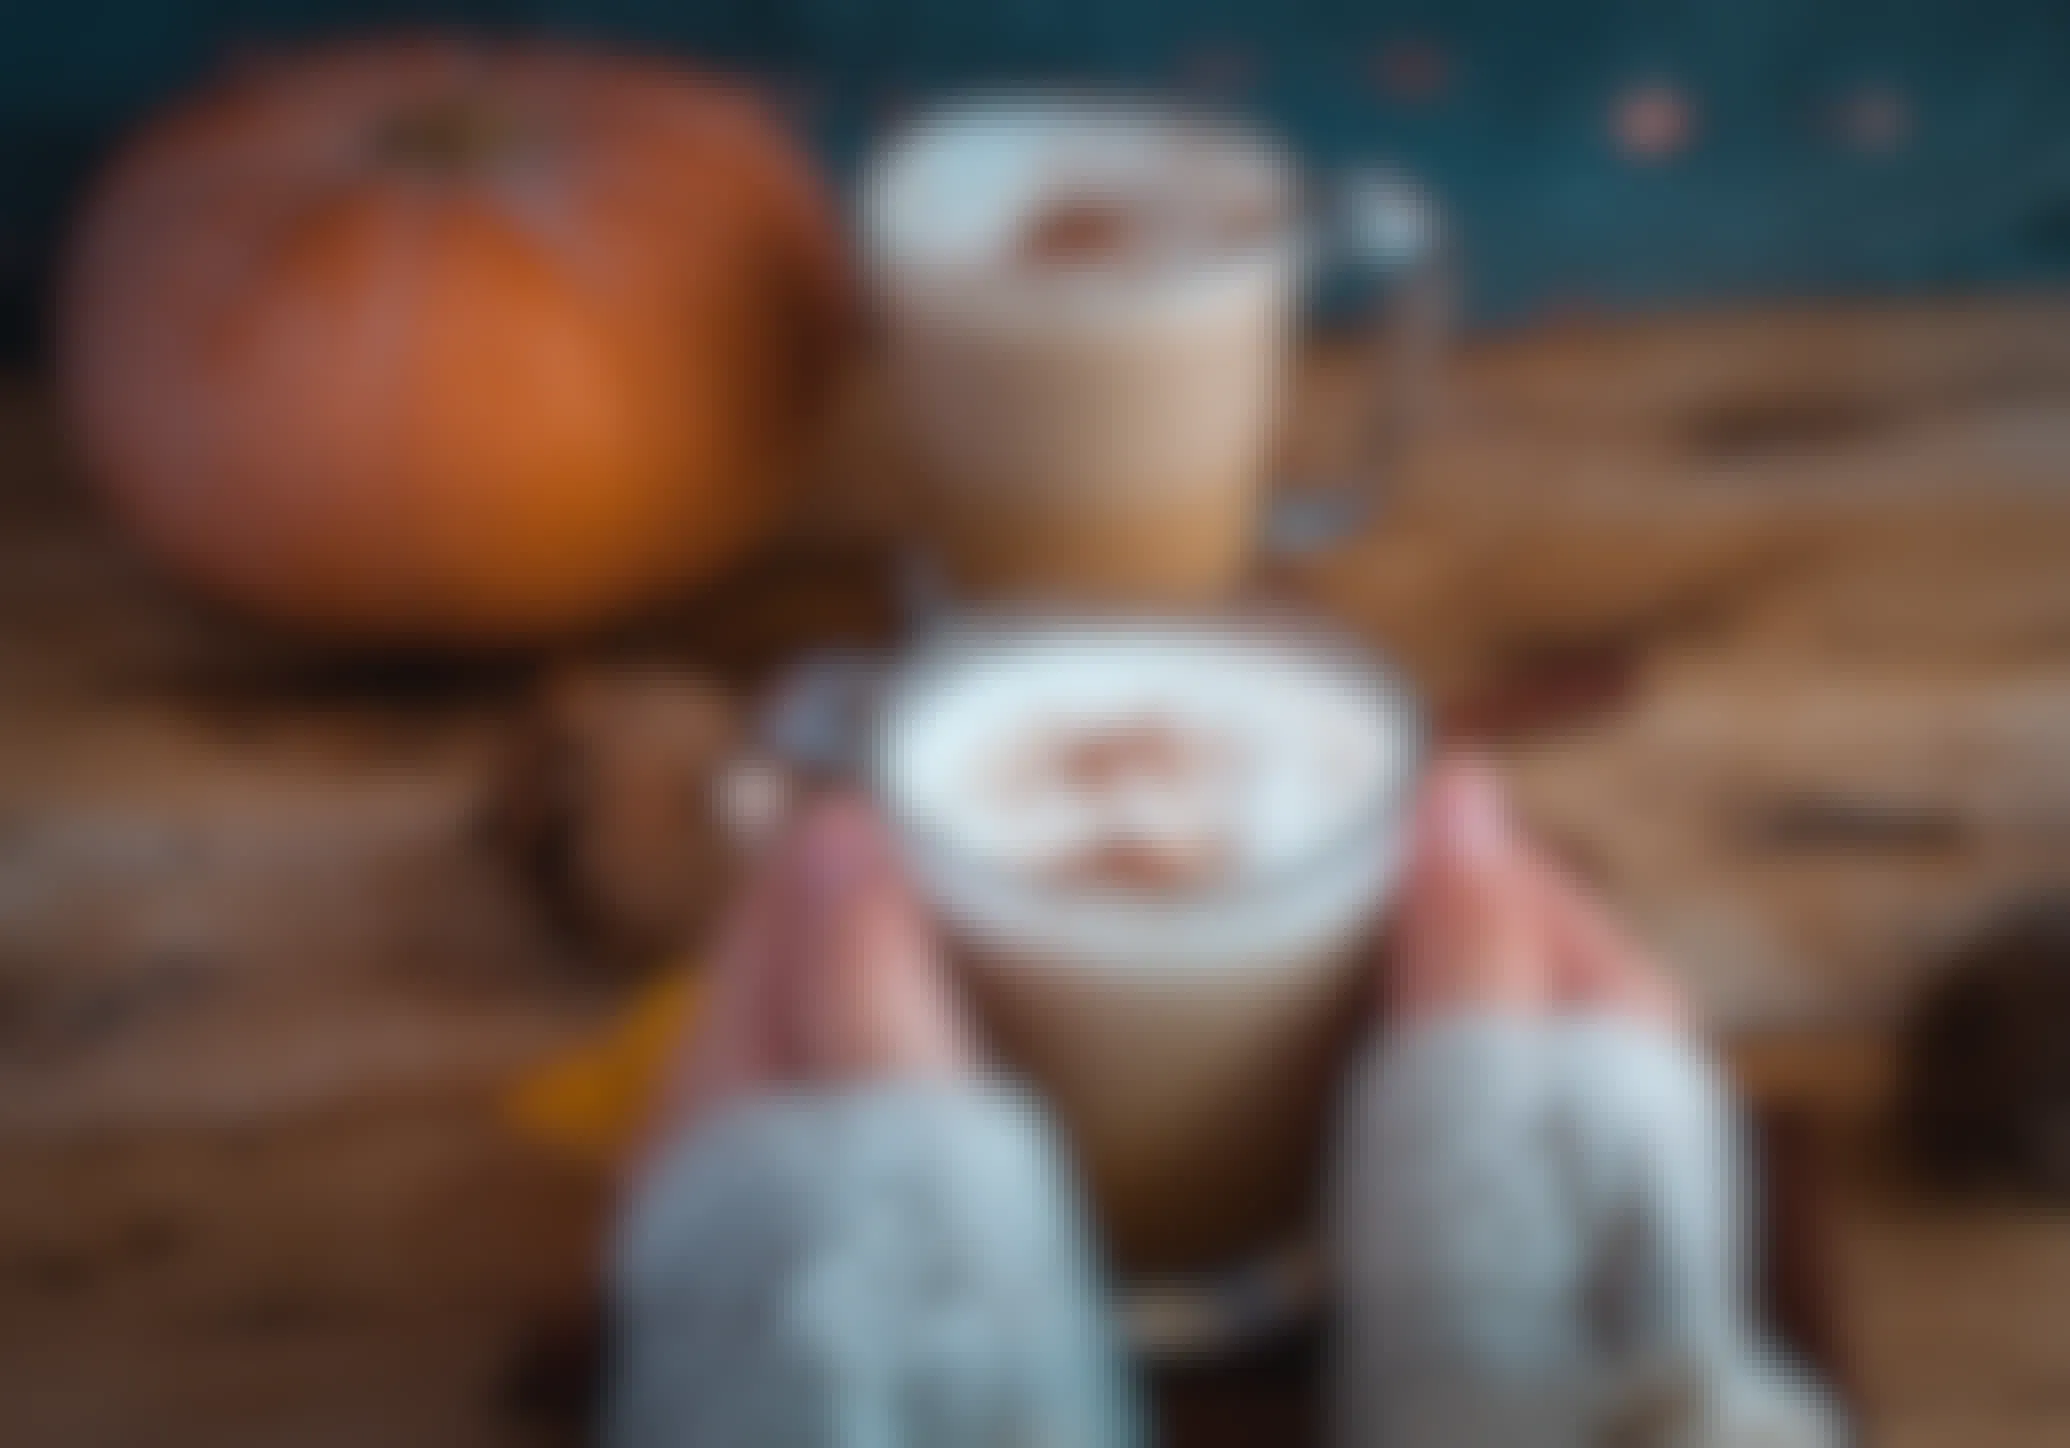 A person's hands holding a mug with a pumpkin spice drink next to a pumpkin on a table.